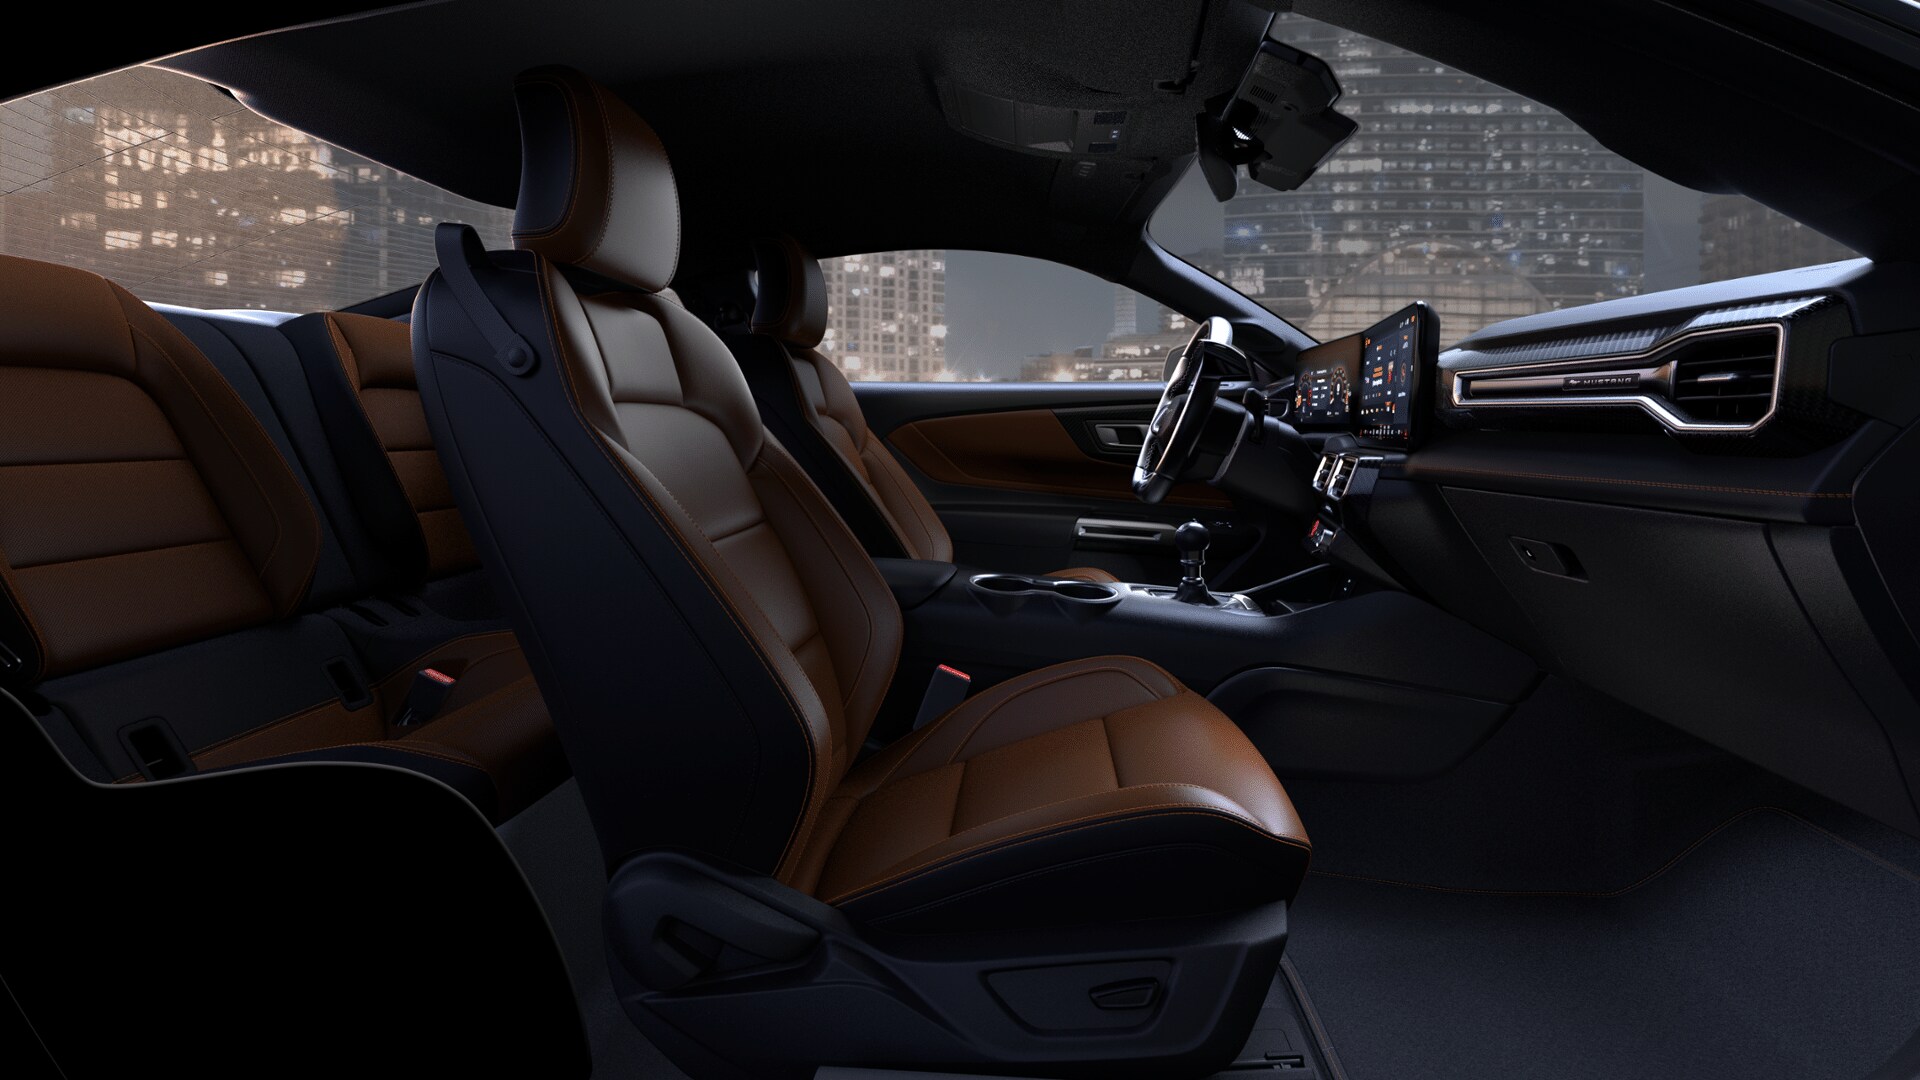 S650 Mustang Pics of the various GT Premium interior leather color choices? Official Emberglo